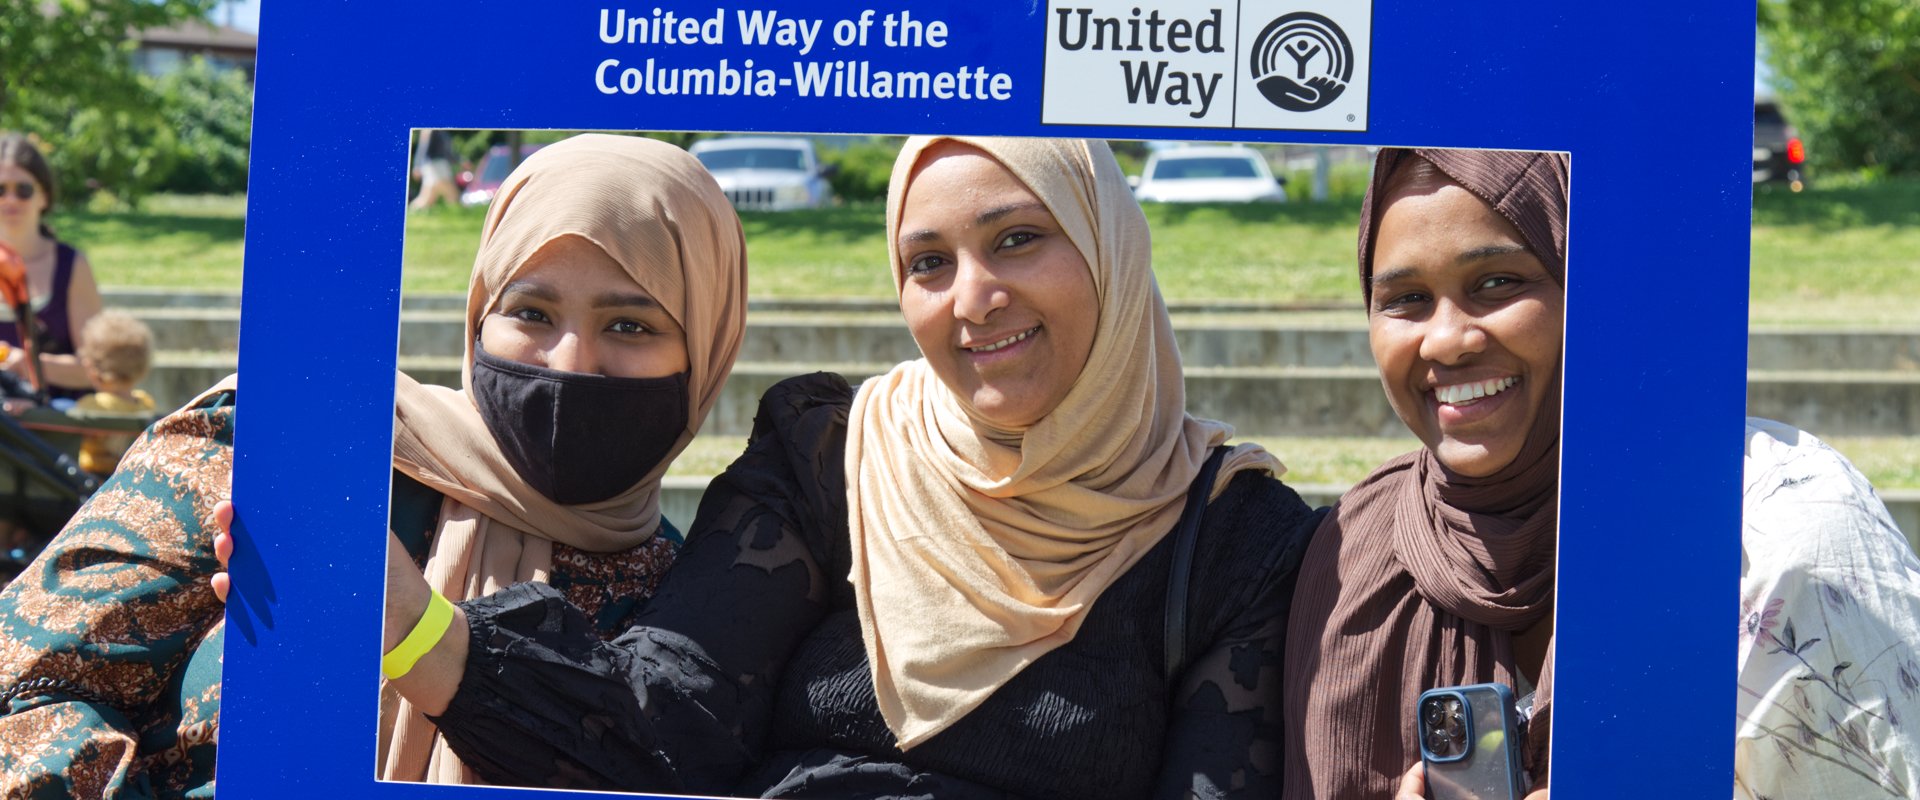 Three women pose smiling with a United Way of the Columbia-Willamette sign